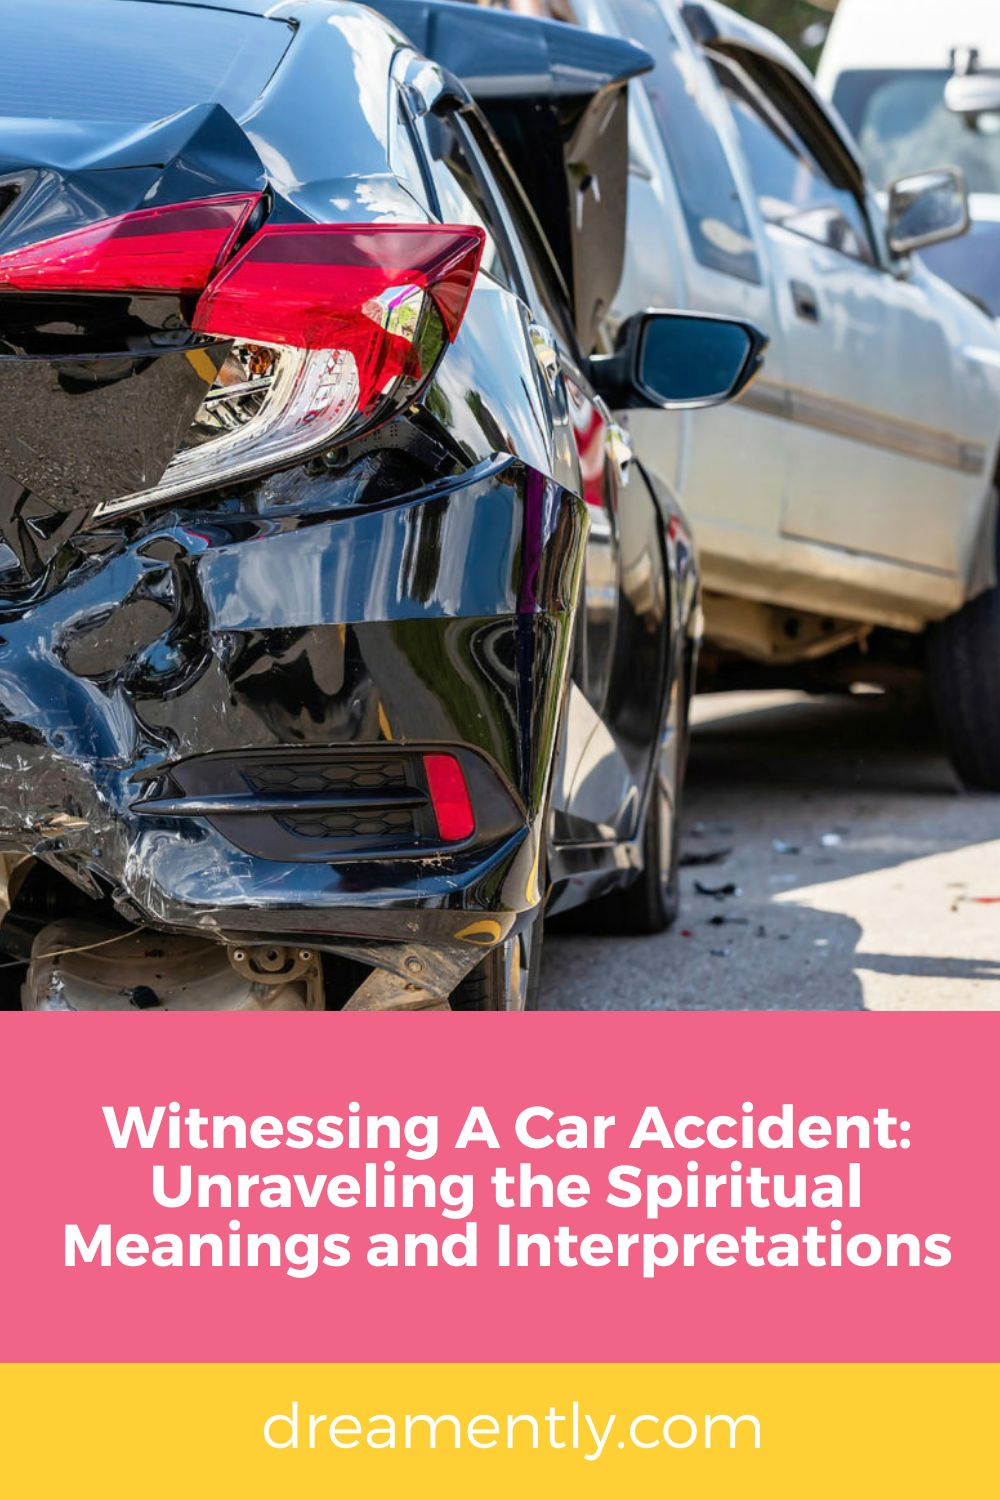 Witnessing A Car Accident Unraveling the Spiritual Meanings and Interpretations